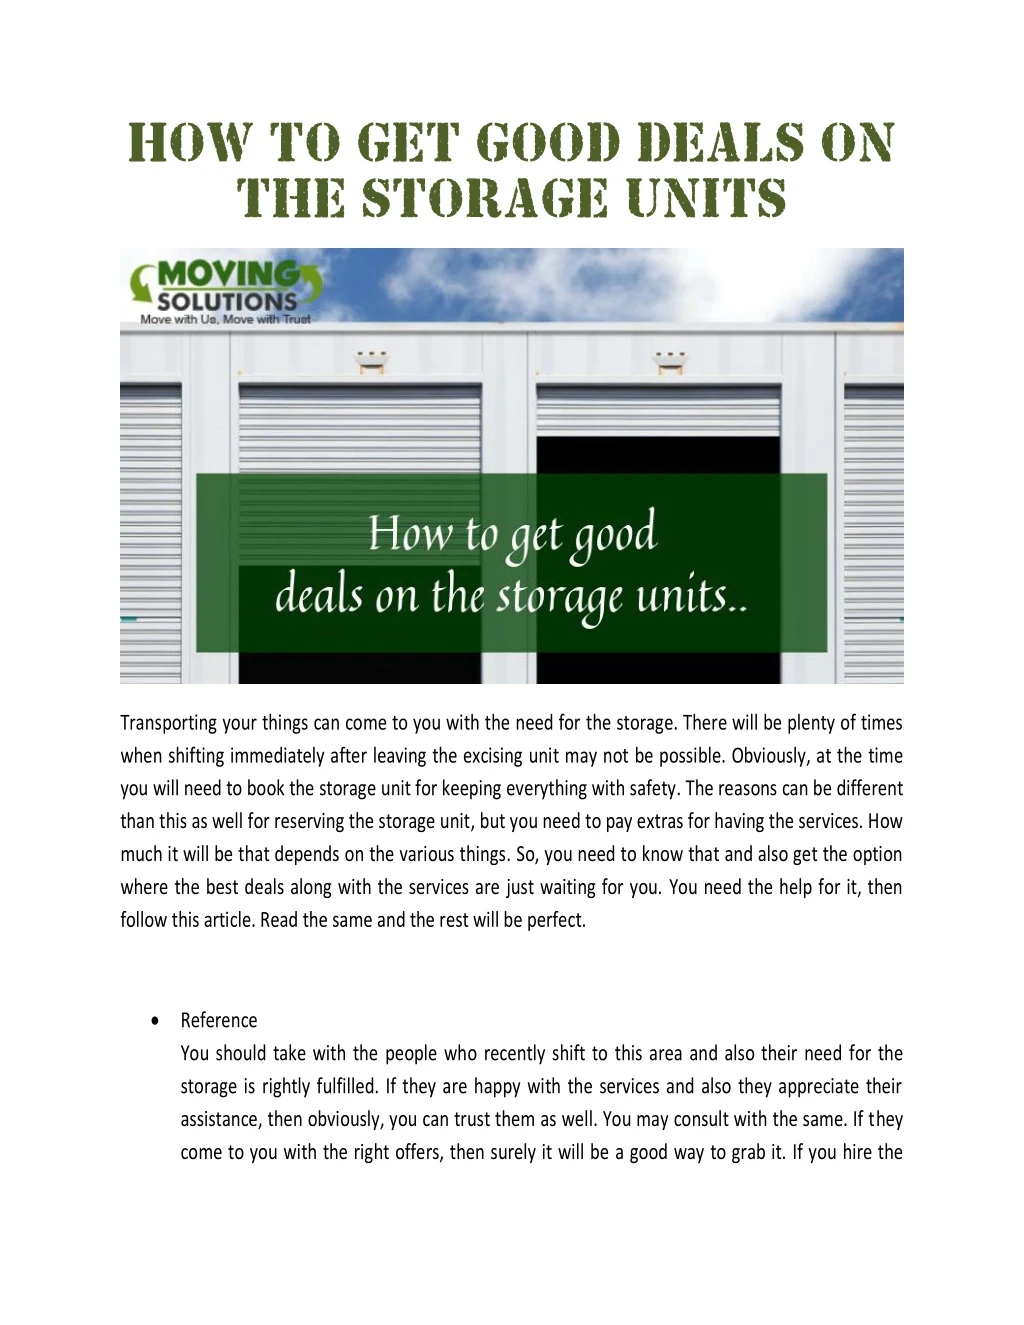 how to get good deals on the storage units